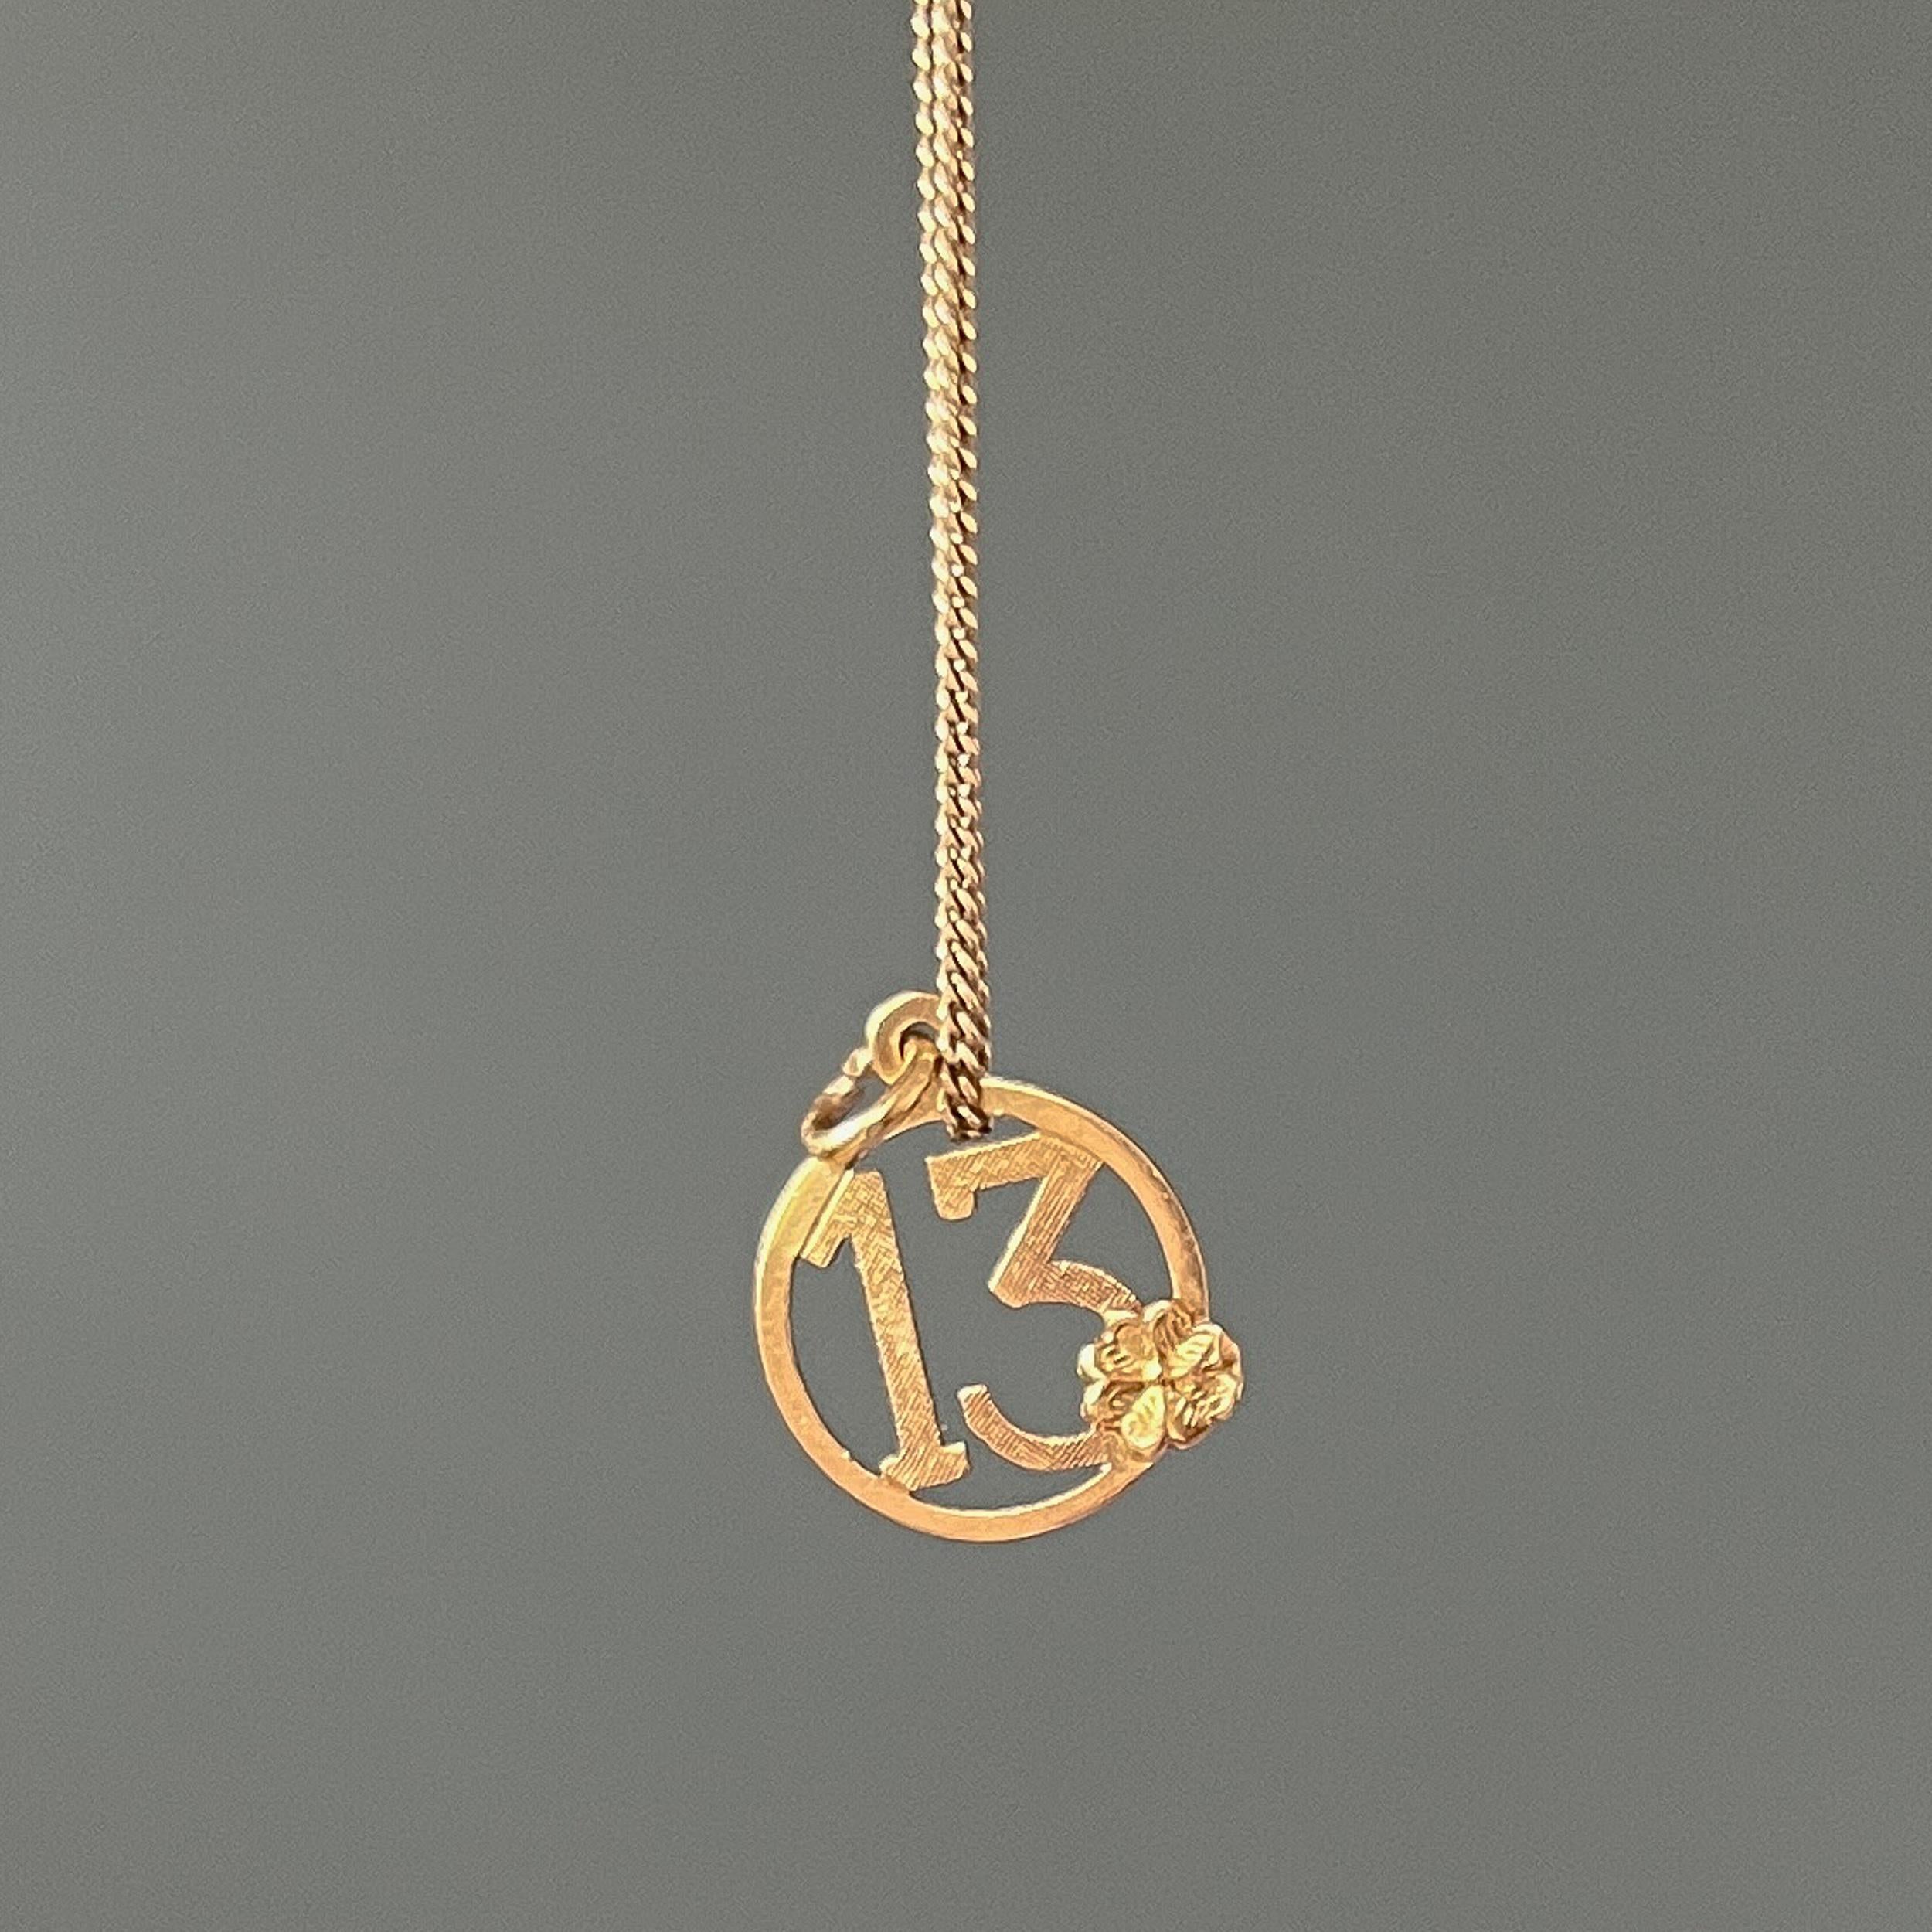 This lucky number thirteen vintage charm is made in 18 karat yellow gold. It has a lovely clover leaf on the front and the number has engraved diagonal lines. There’s nothing to fear about this number. In several cultures, this number is considered